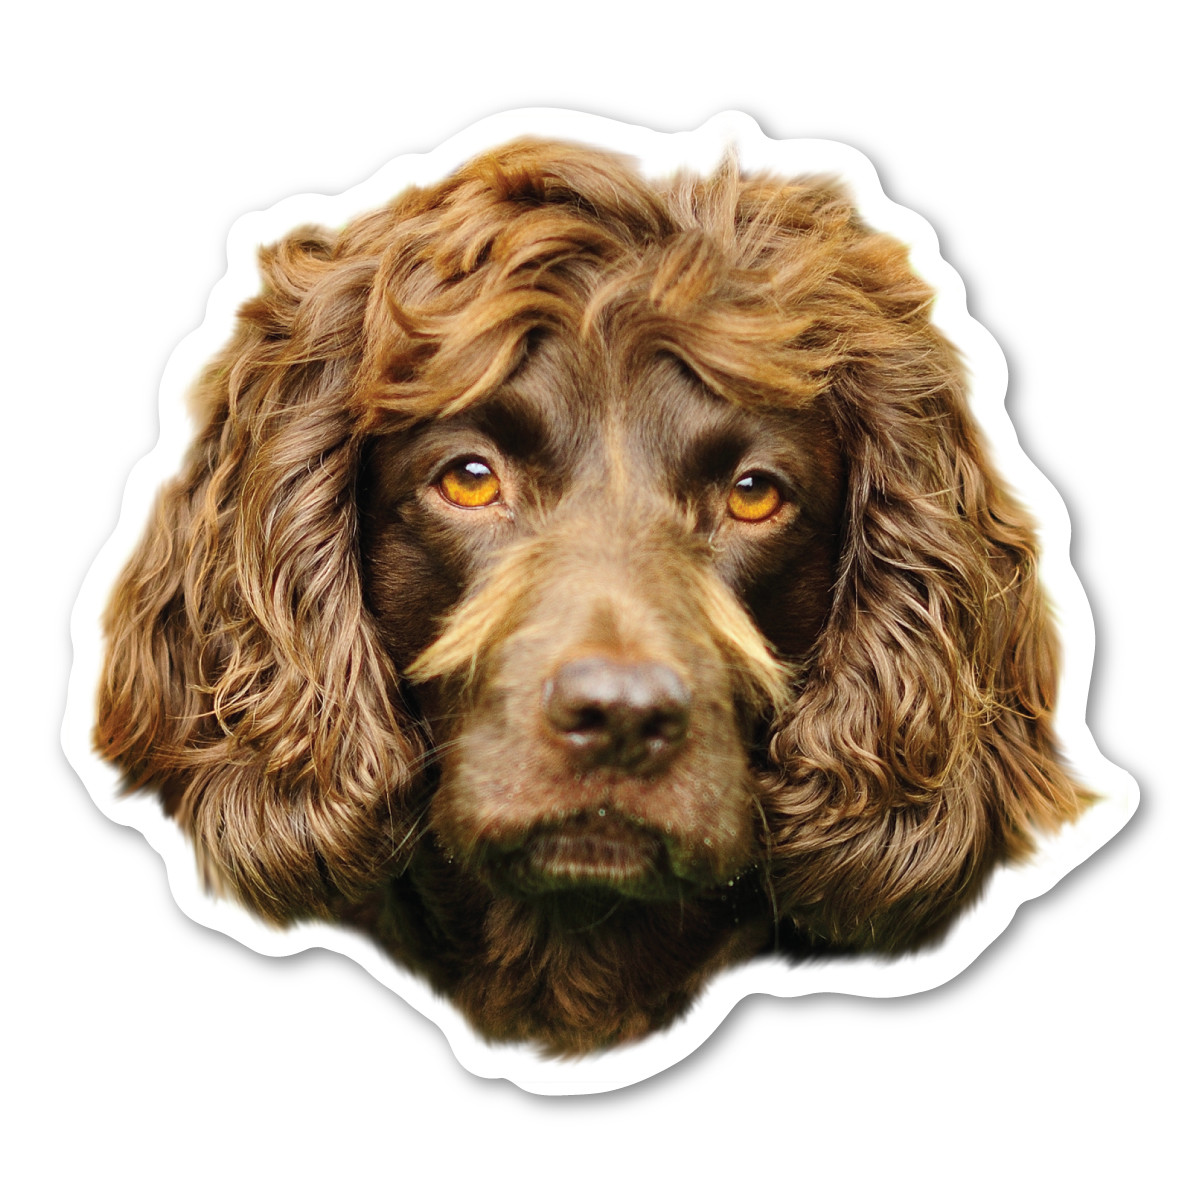 is the boykin spaniel a good breed of dog